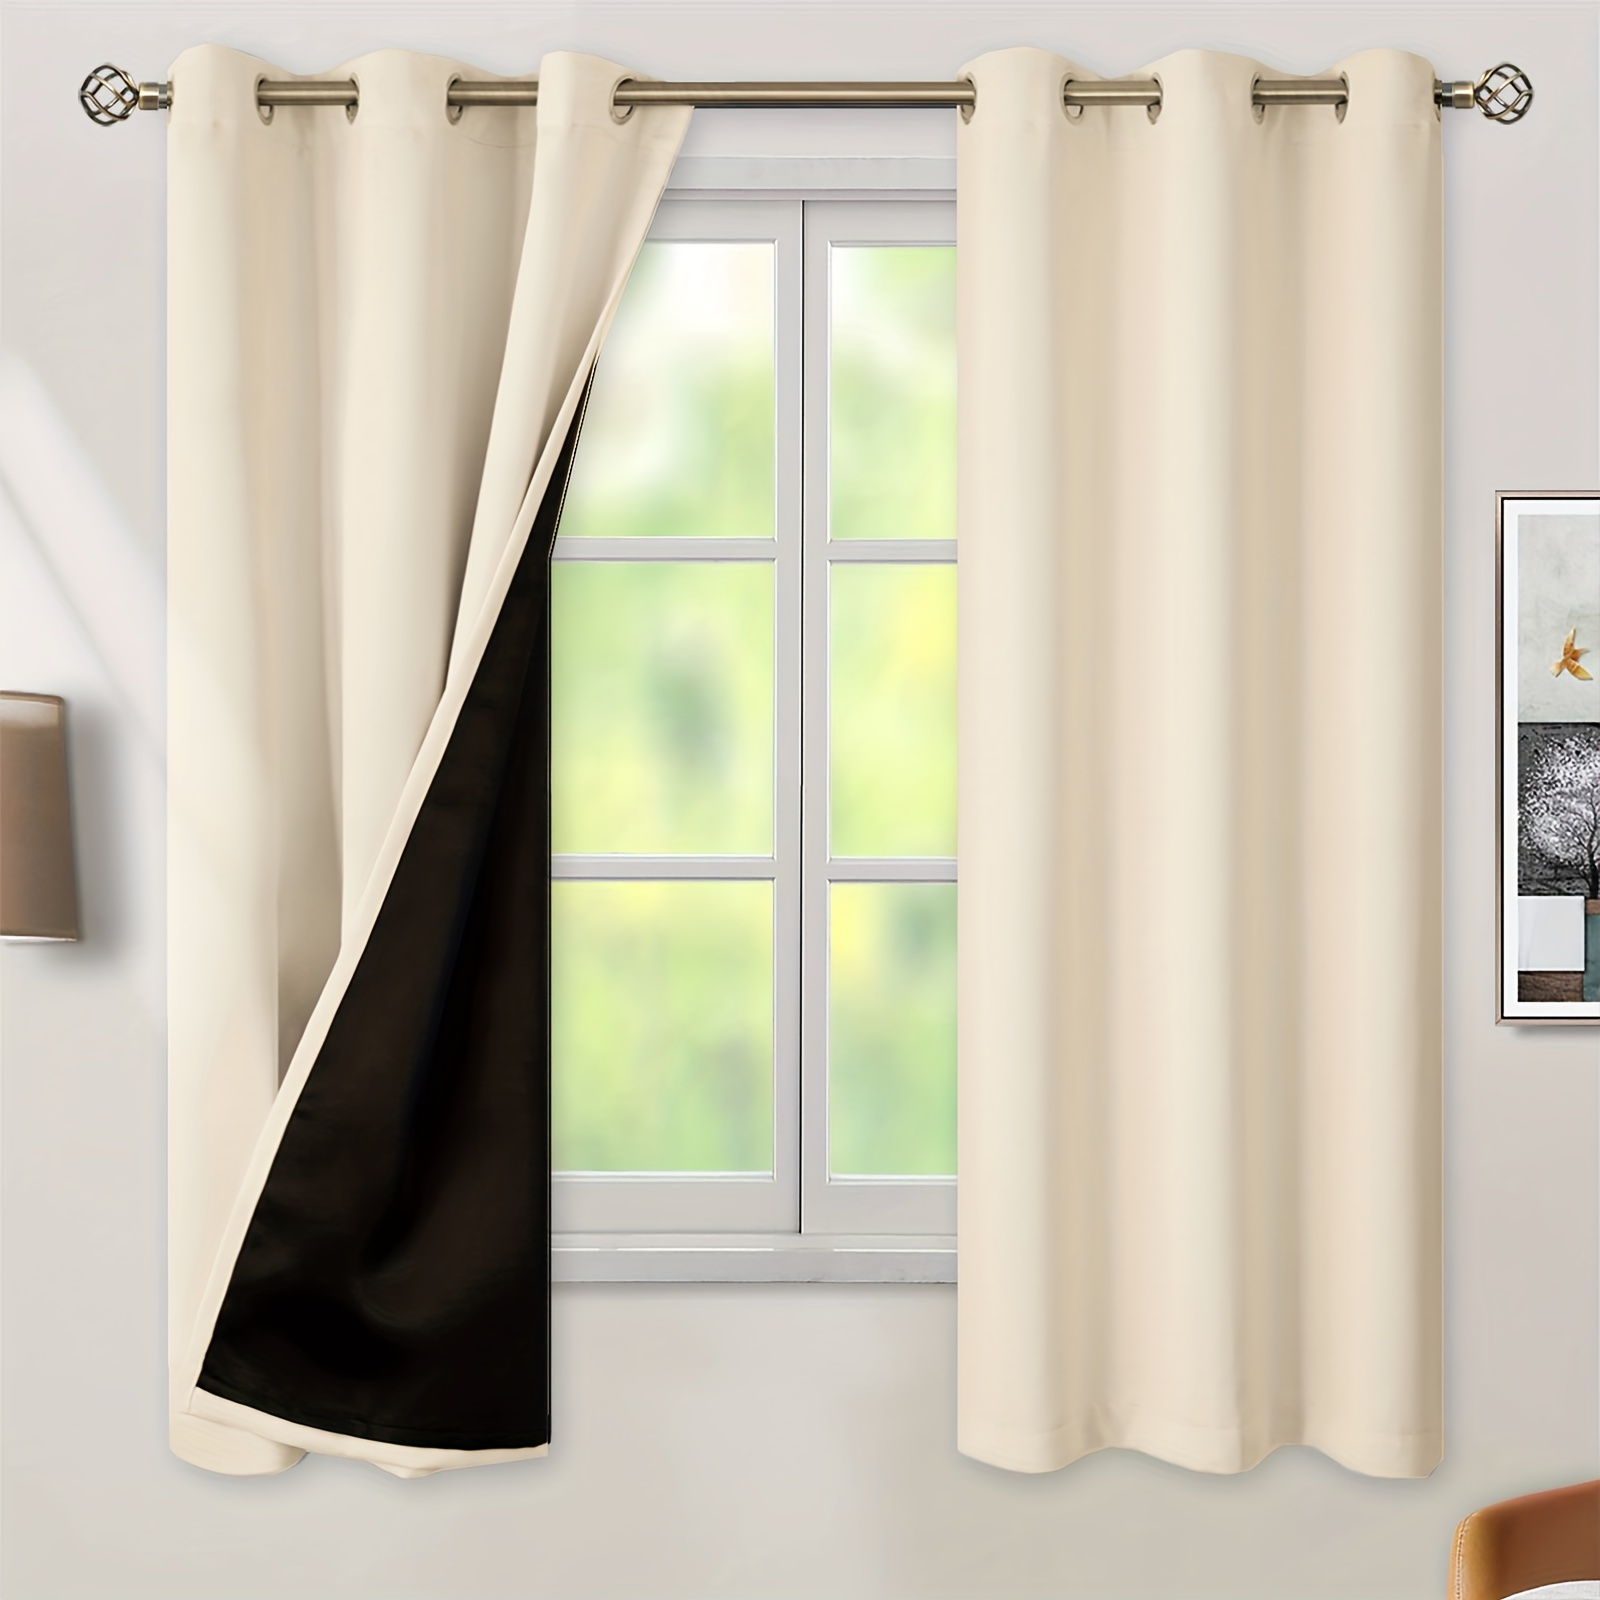 

2 Panels Blackout Curtains Heat Insulation Curtain Panels With Coated Insulation Lining Suitable For Living Room, Bedroom, Kitchen, Bathroom, Home Decor, Room Decor